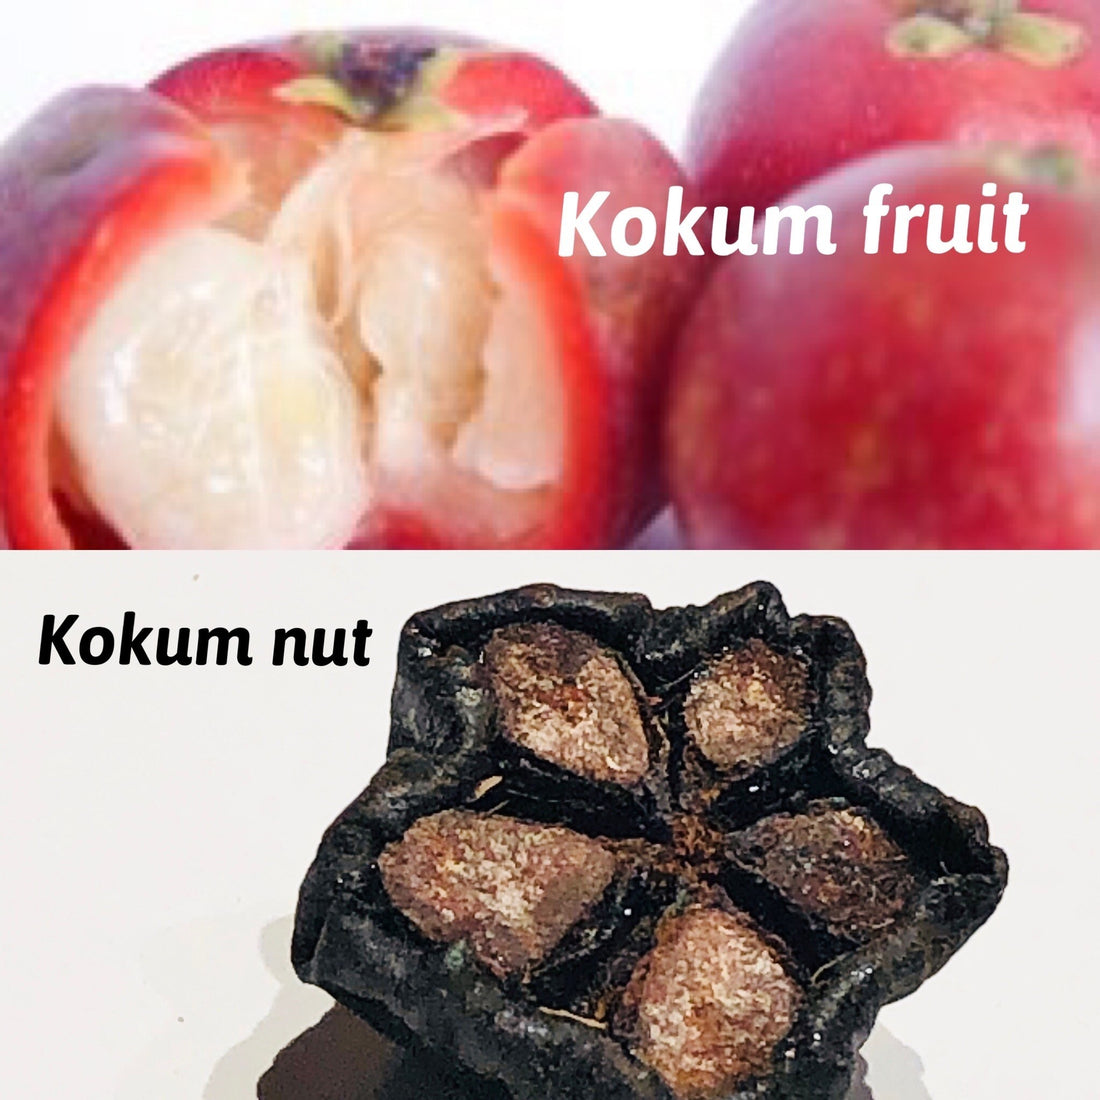 What is Kokum?